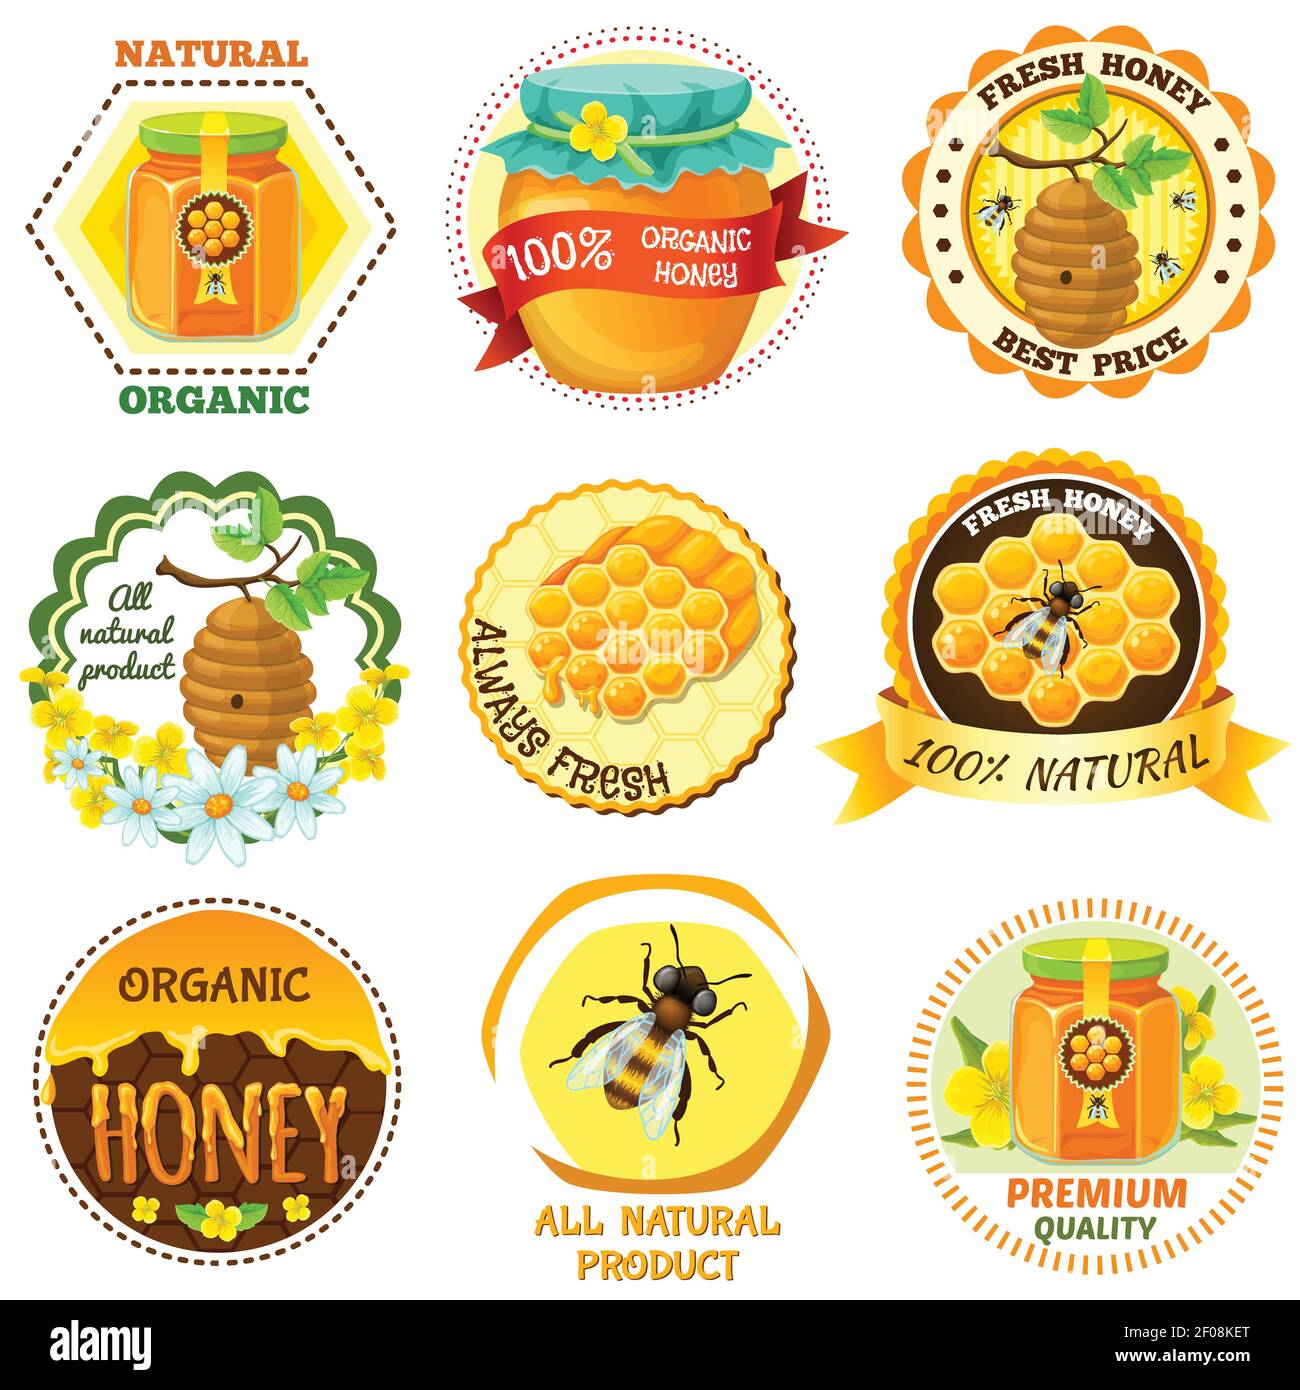 Honey emblem set with descriptions of natural organic fresh honey best price all natural product vector illustration Stock Vector